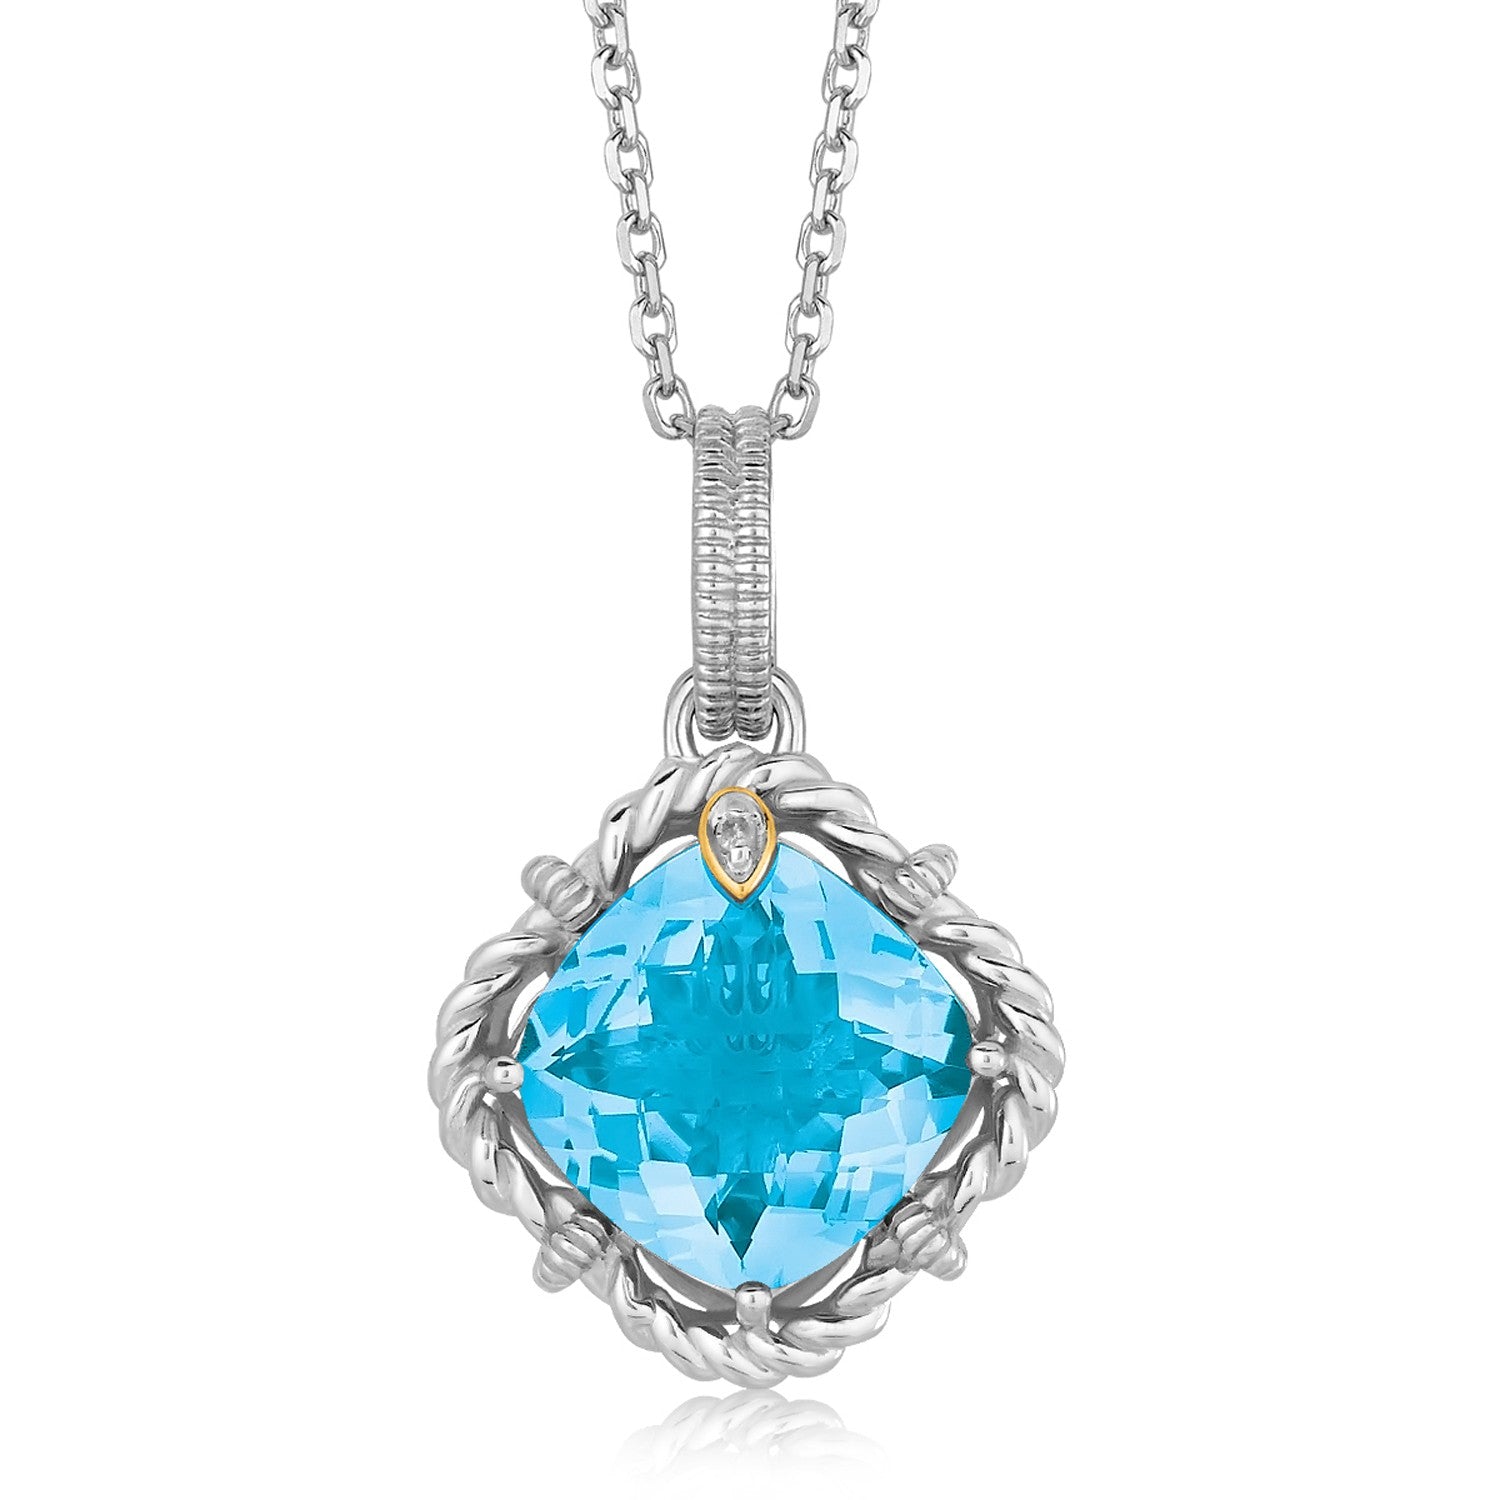 18k Yellow Gold and Sterling Silver Pendant with Cushion Blue Topaz and Diamonds